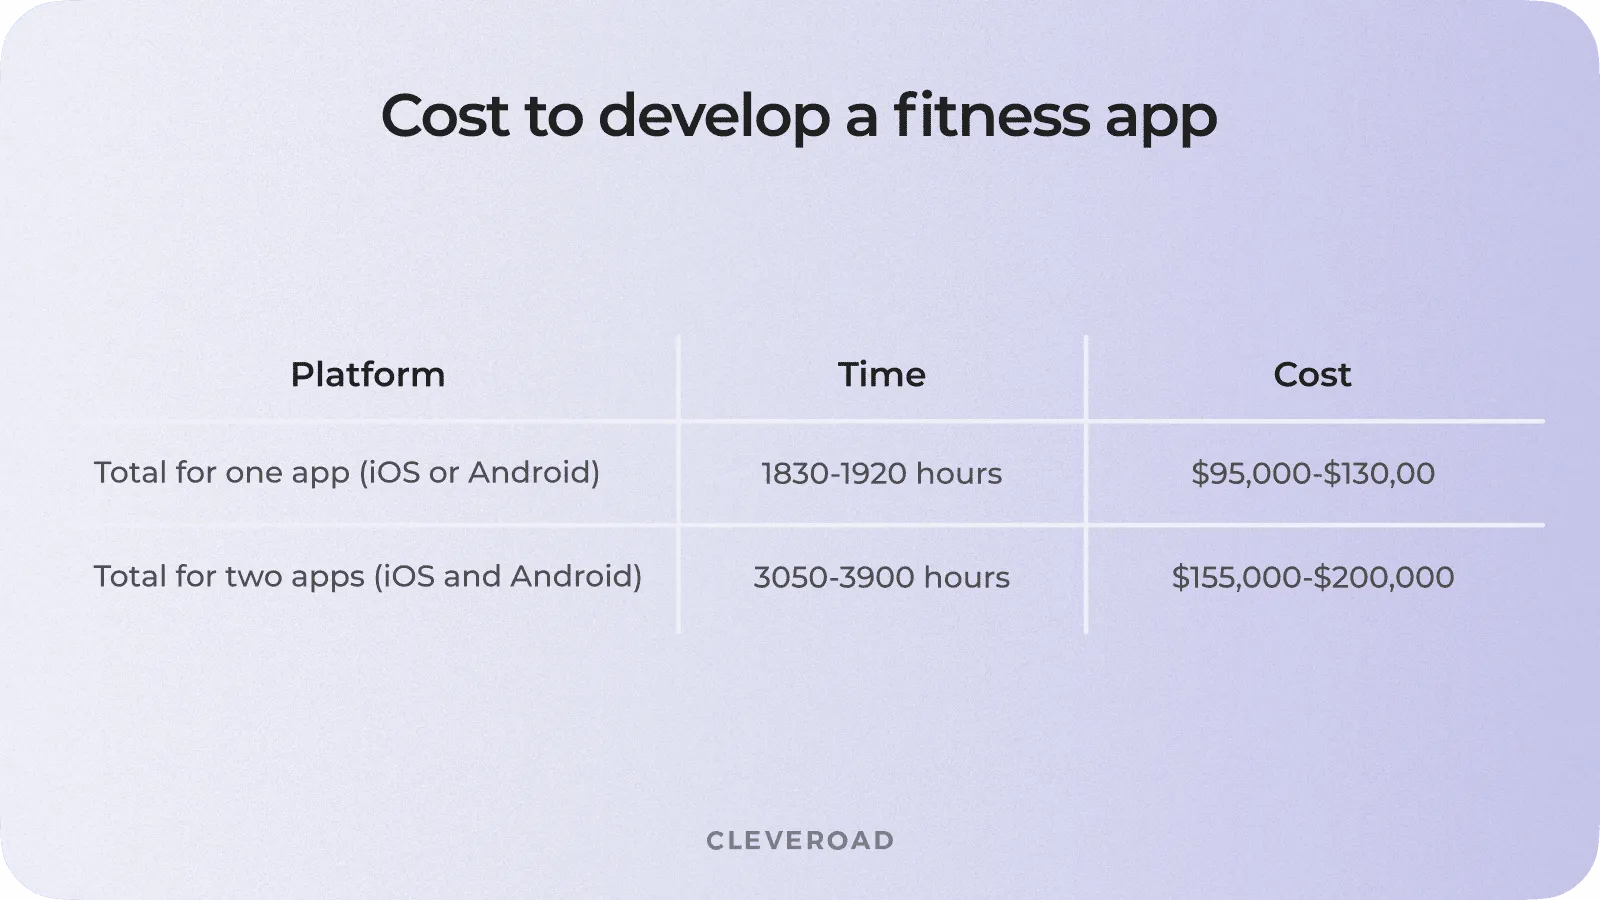 Cost of developing a fitness app